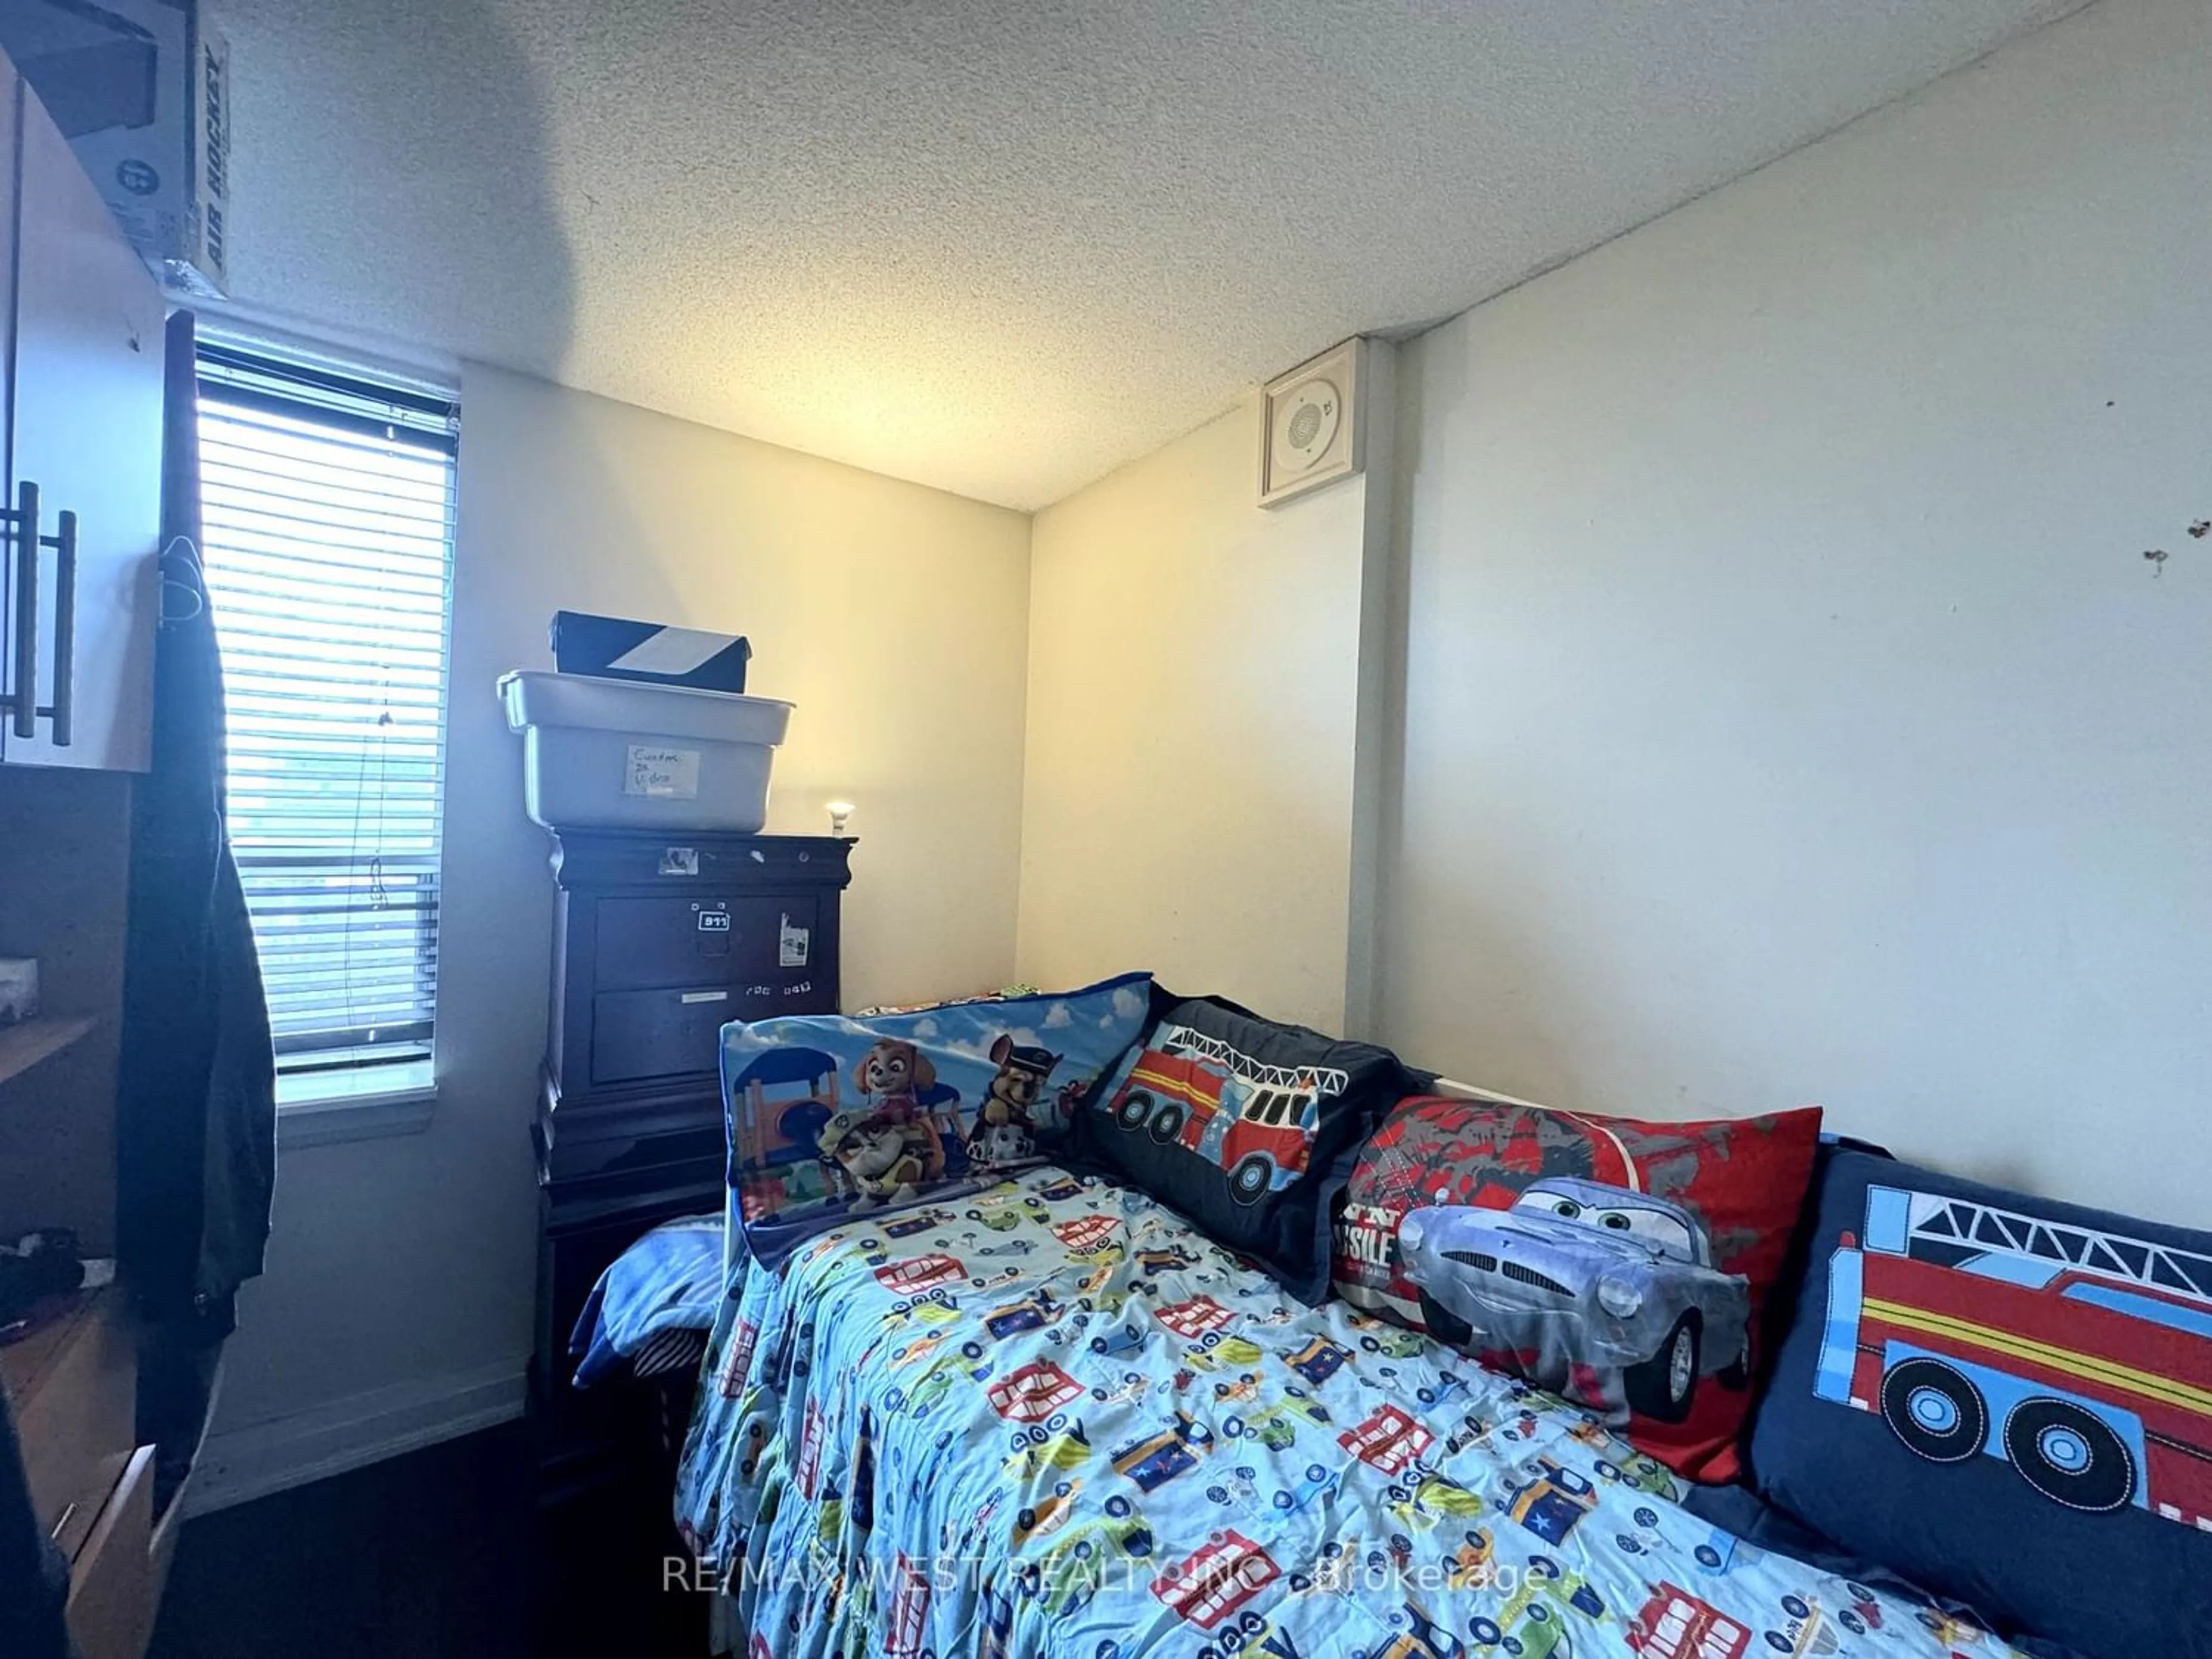 A pic of a room for 2737 Keele St #519, Toronto Ontario M3M 2E9